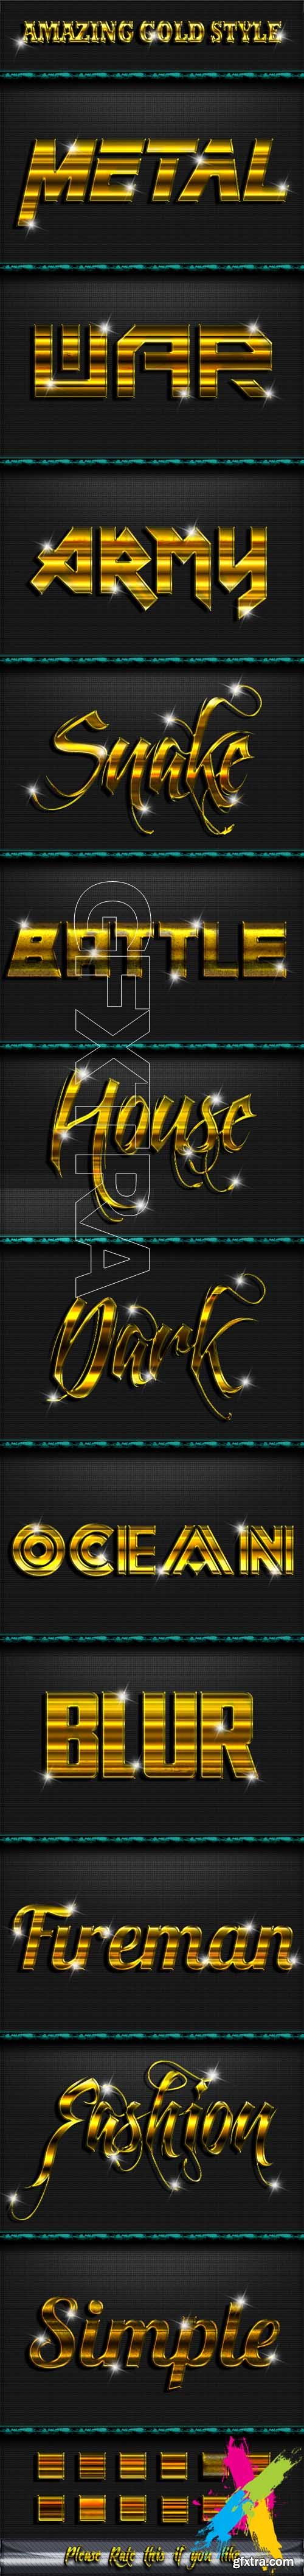 Graphicriver - Gold Style Text Effect V.2 20244817